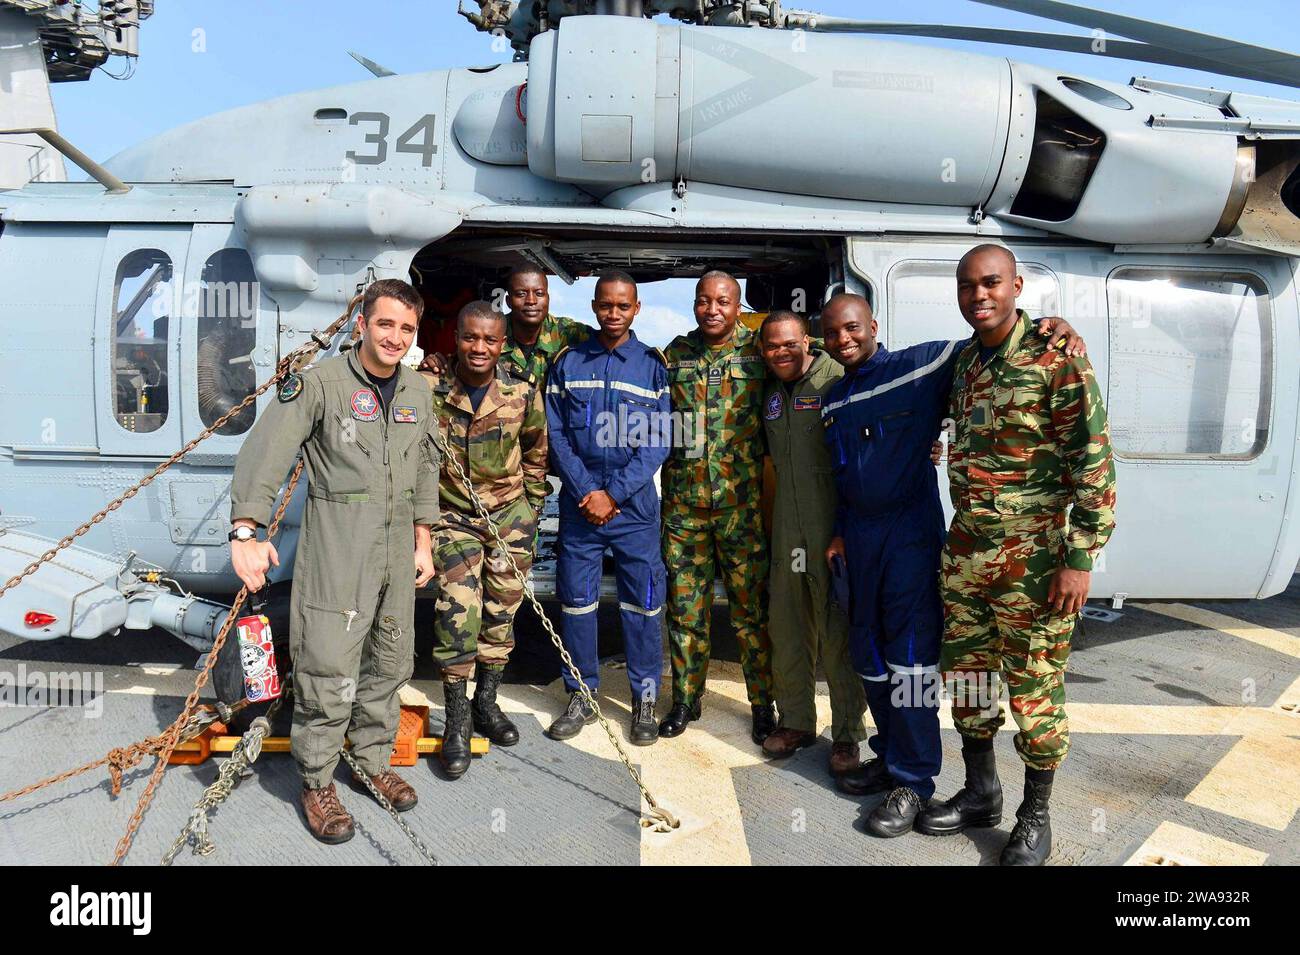 US military forces. 180331QR145-028 MEDITERRANEAN SEA (March 31, 2018) Sailors assigned to Helicopter Sea Combat Squadron (HSC) 28 and sailors from Cote d'Ivoire, Gabon, and Nigeria pose for a photo in front of an MH-60S Sea Hawk helicopter aboard the Blue Ridge-class command and control ship USS Mount Whitney (LCC 20) March 31, 2018. Mount Whitney, forward-deployed to Gaeta, Italy, operates with a combined crew of U.S. Navy Sailors and Military Sealift Command civil service mariners. (U.S. Navy photo by Mass Communication Specialist 3rd Class Krystina Coffey/Released) Stock Photo